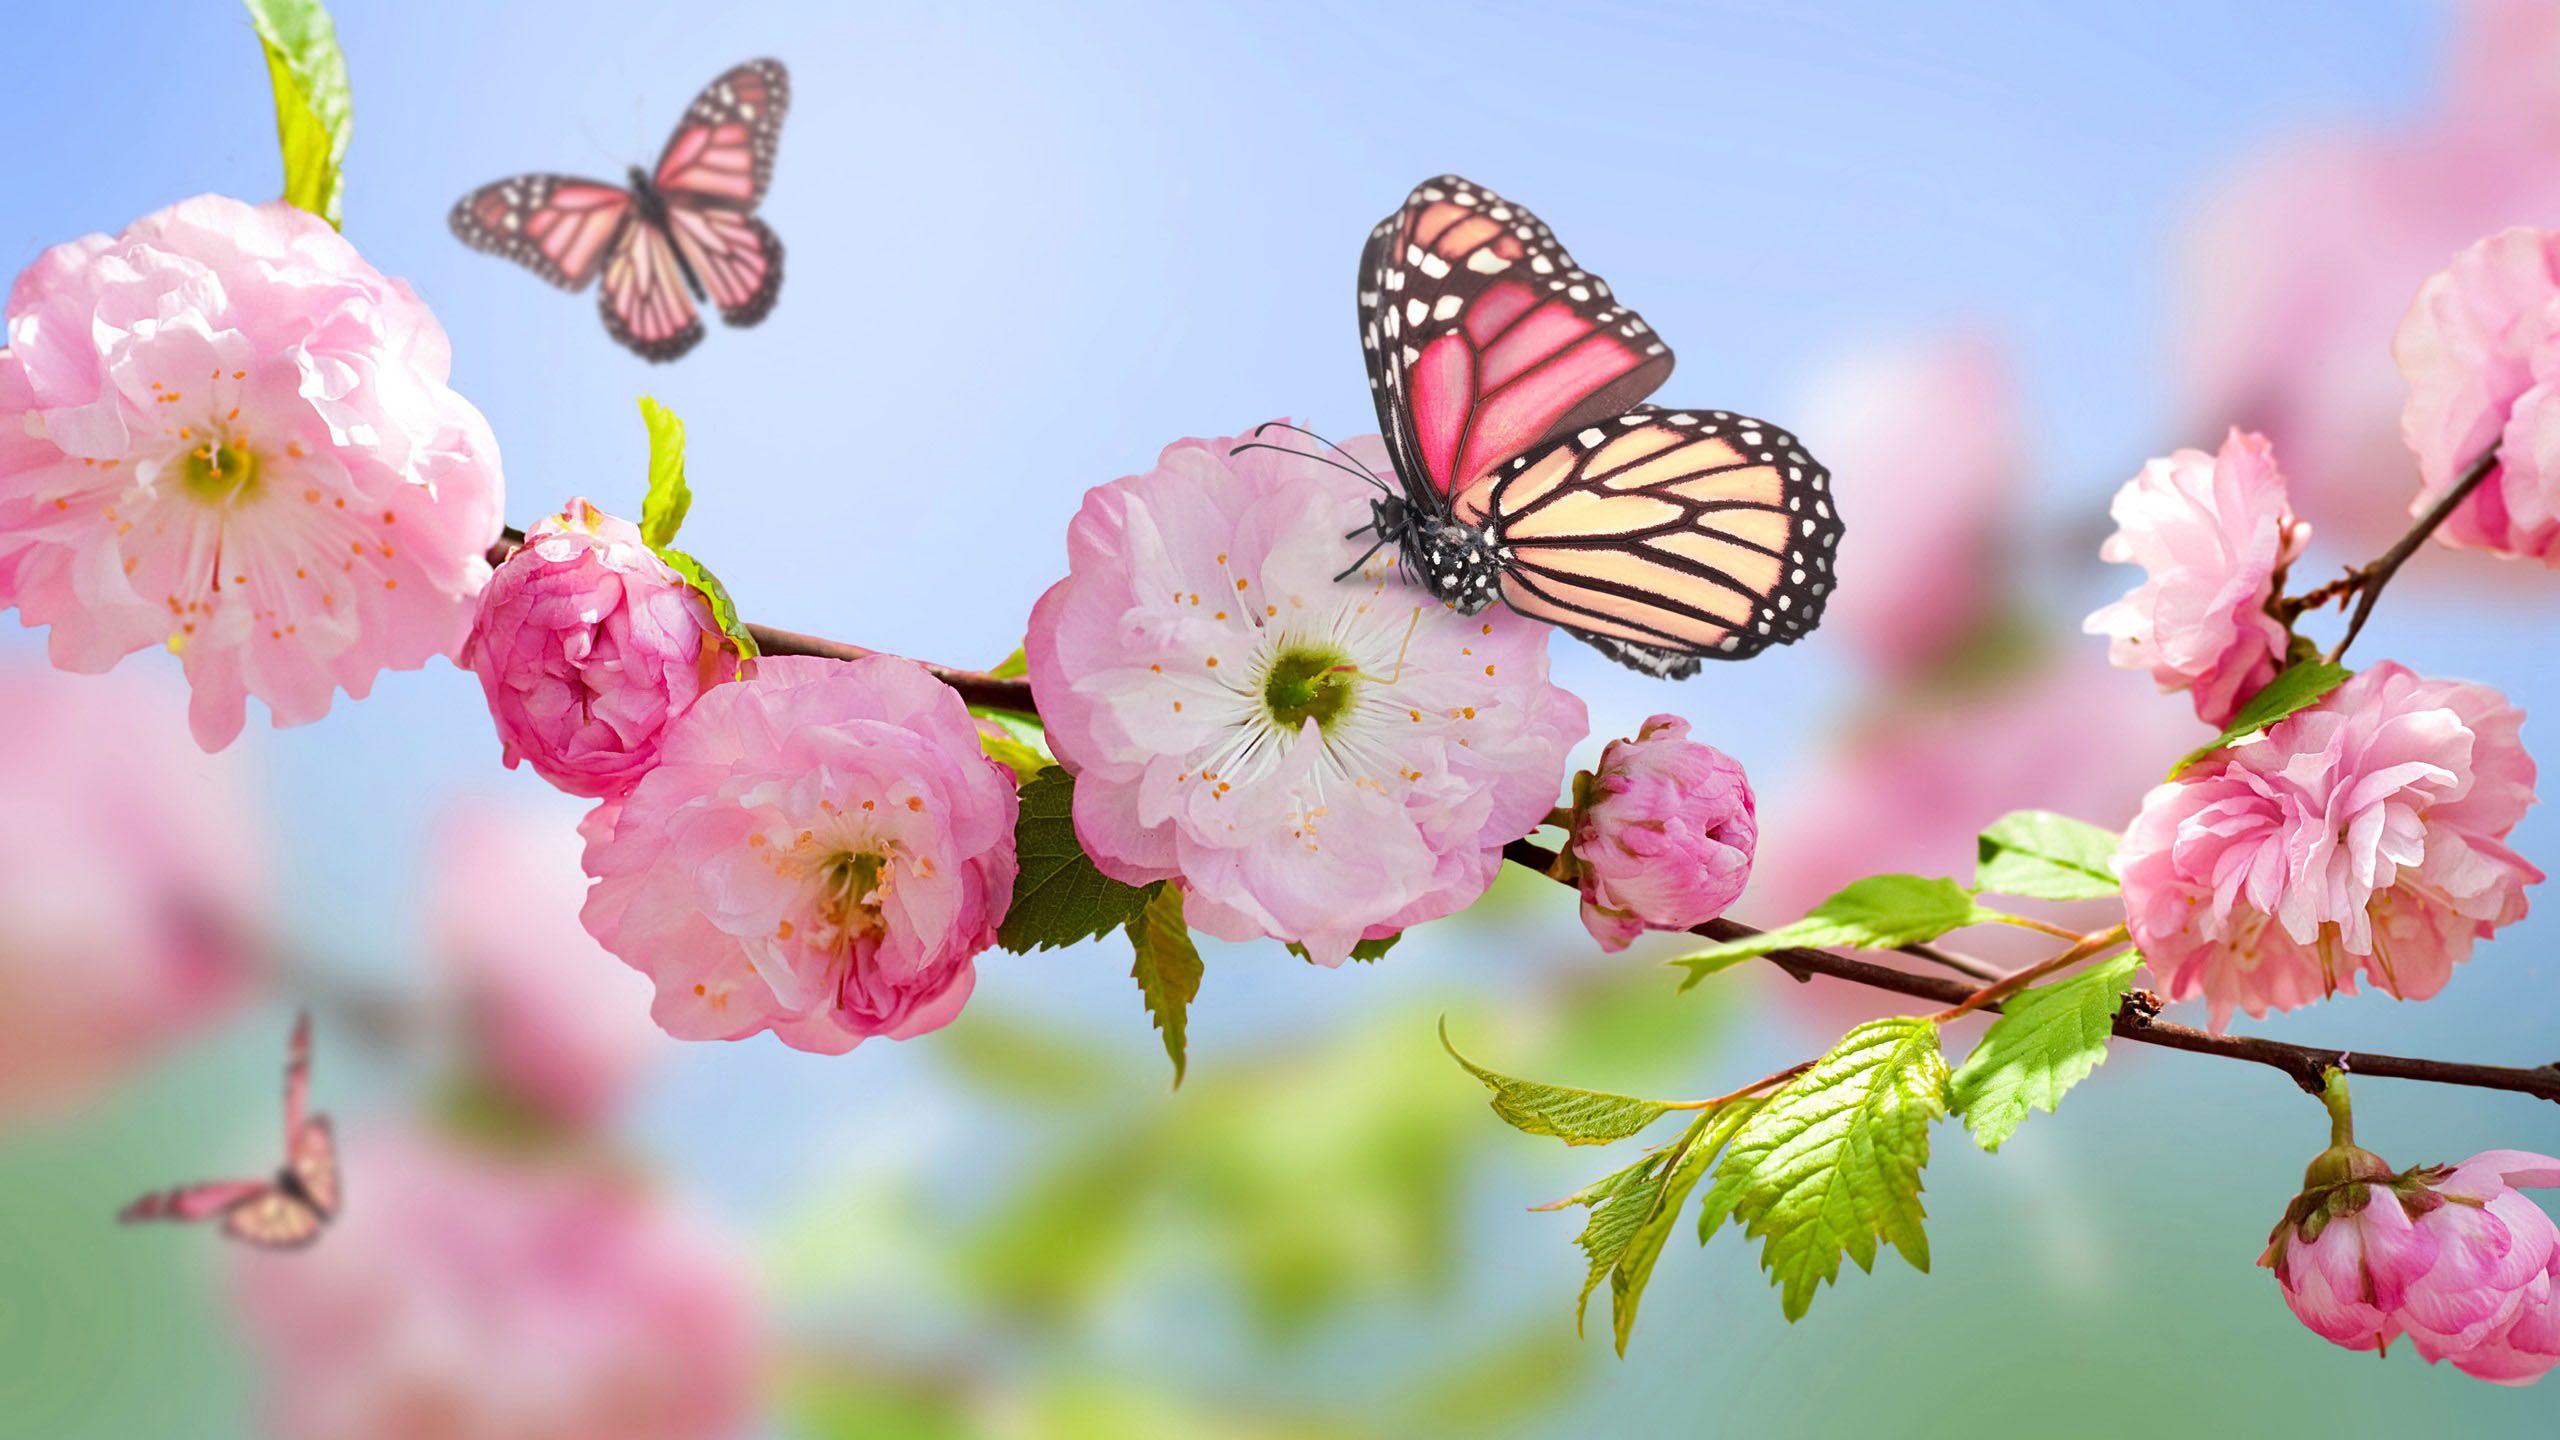 Beautiful Spring Scenery Wallpapers